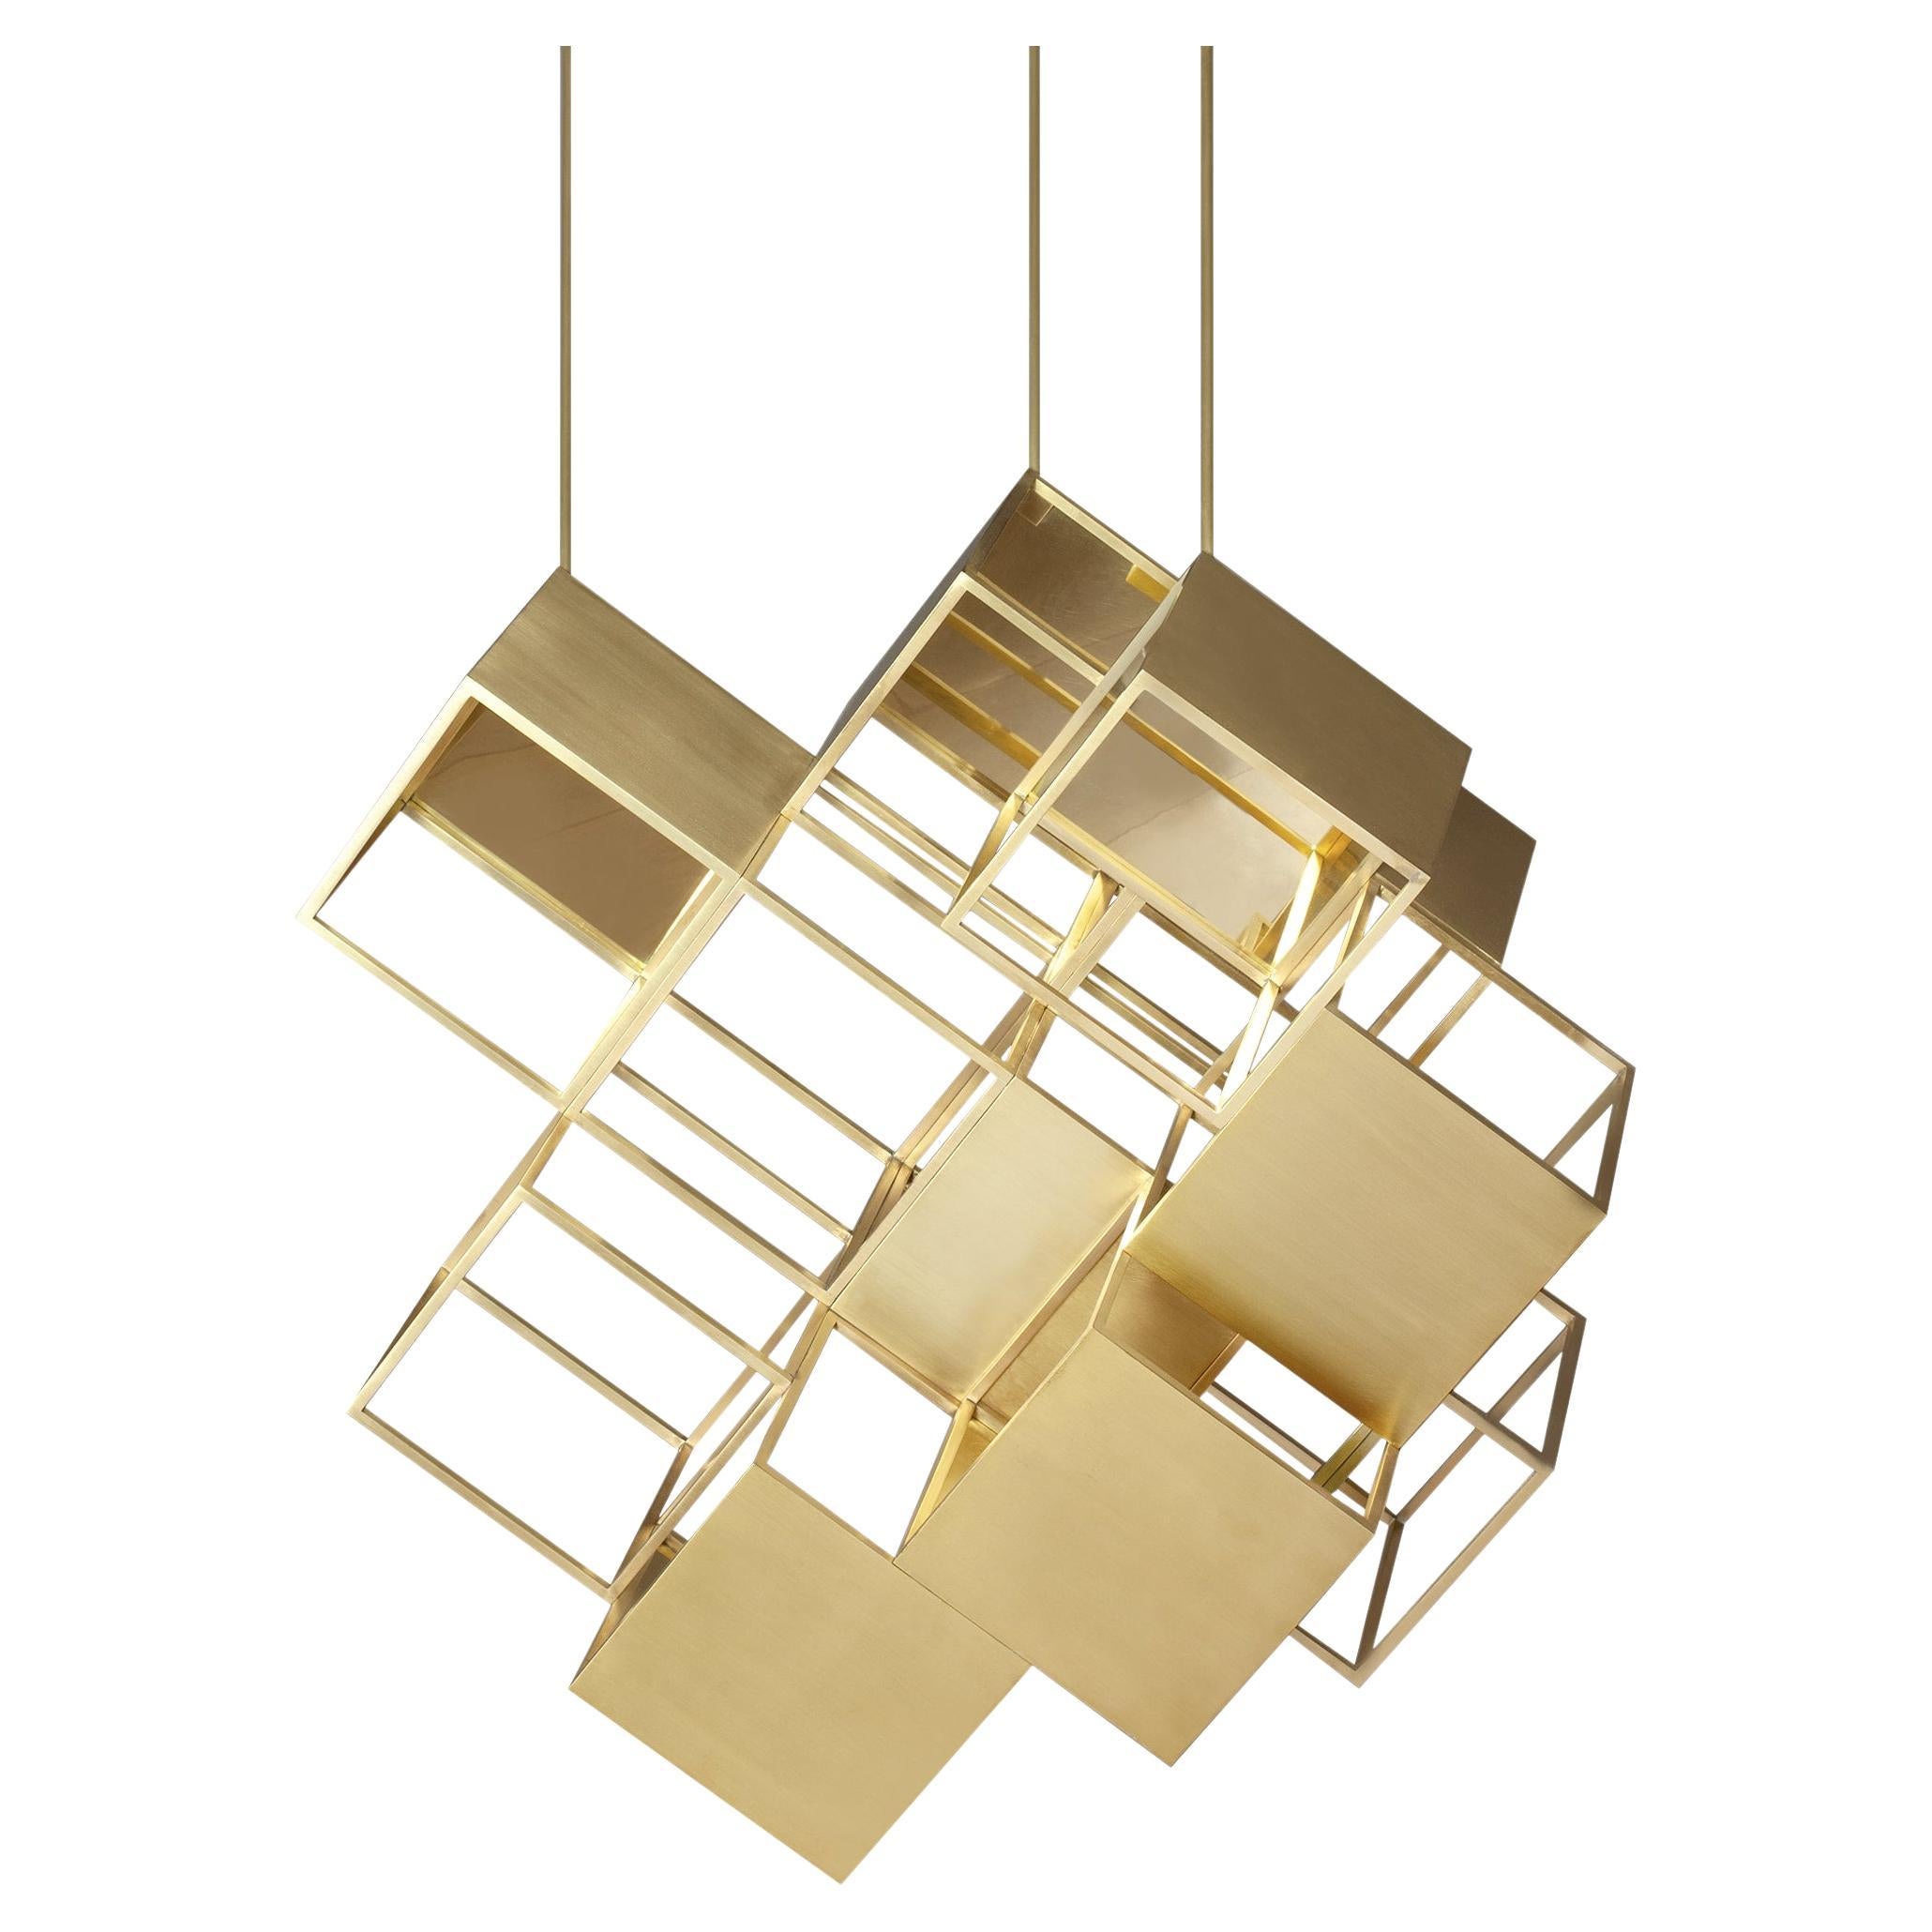 Lattis 11 Chandelier Lighting Brass by Diaphan Studio, REP by Tuleste Factory For Sale